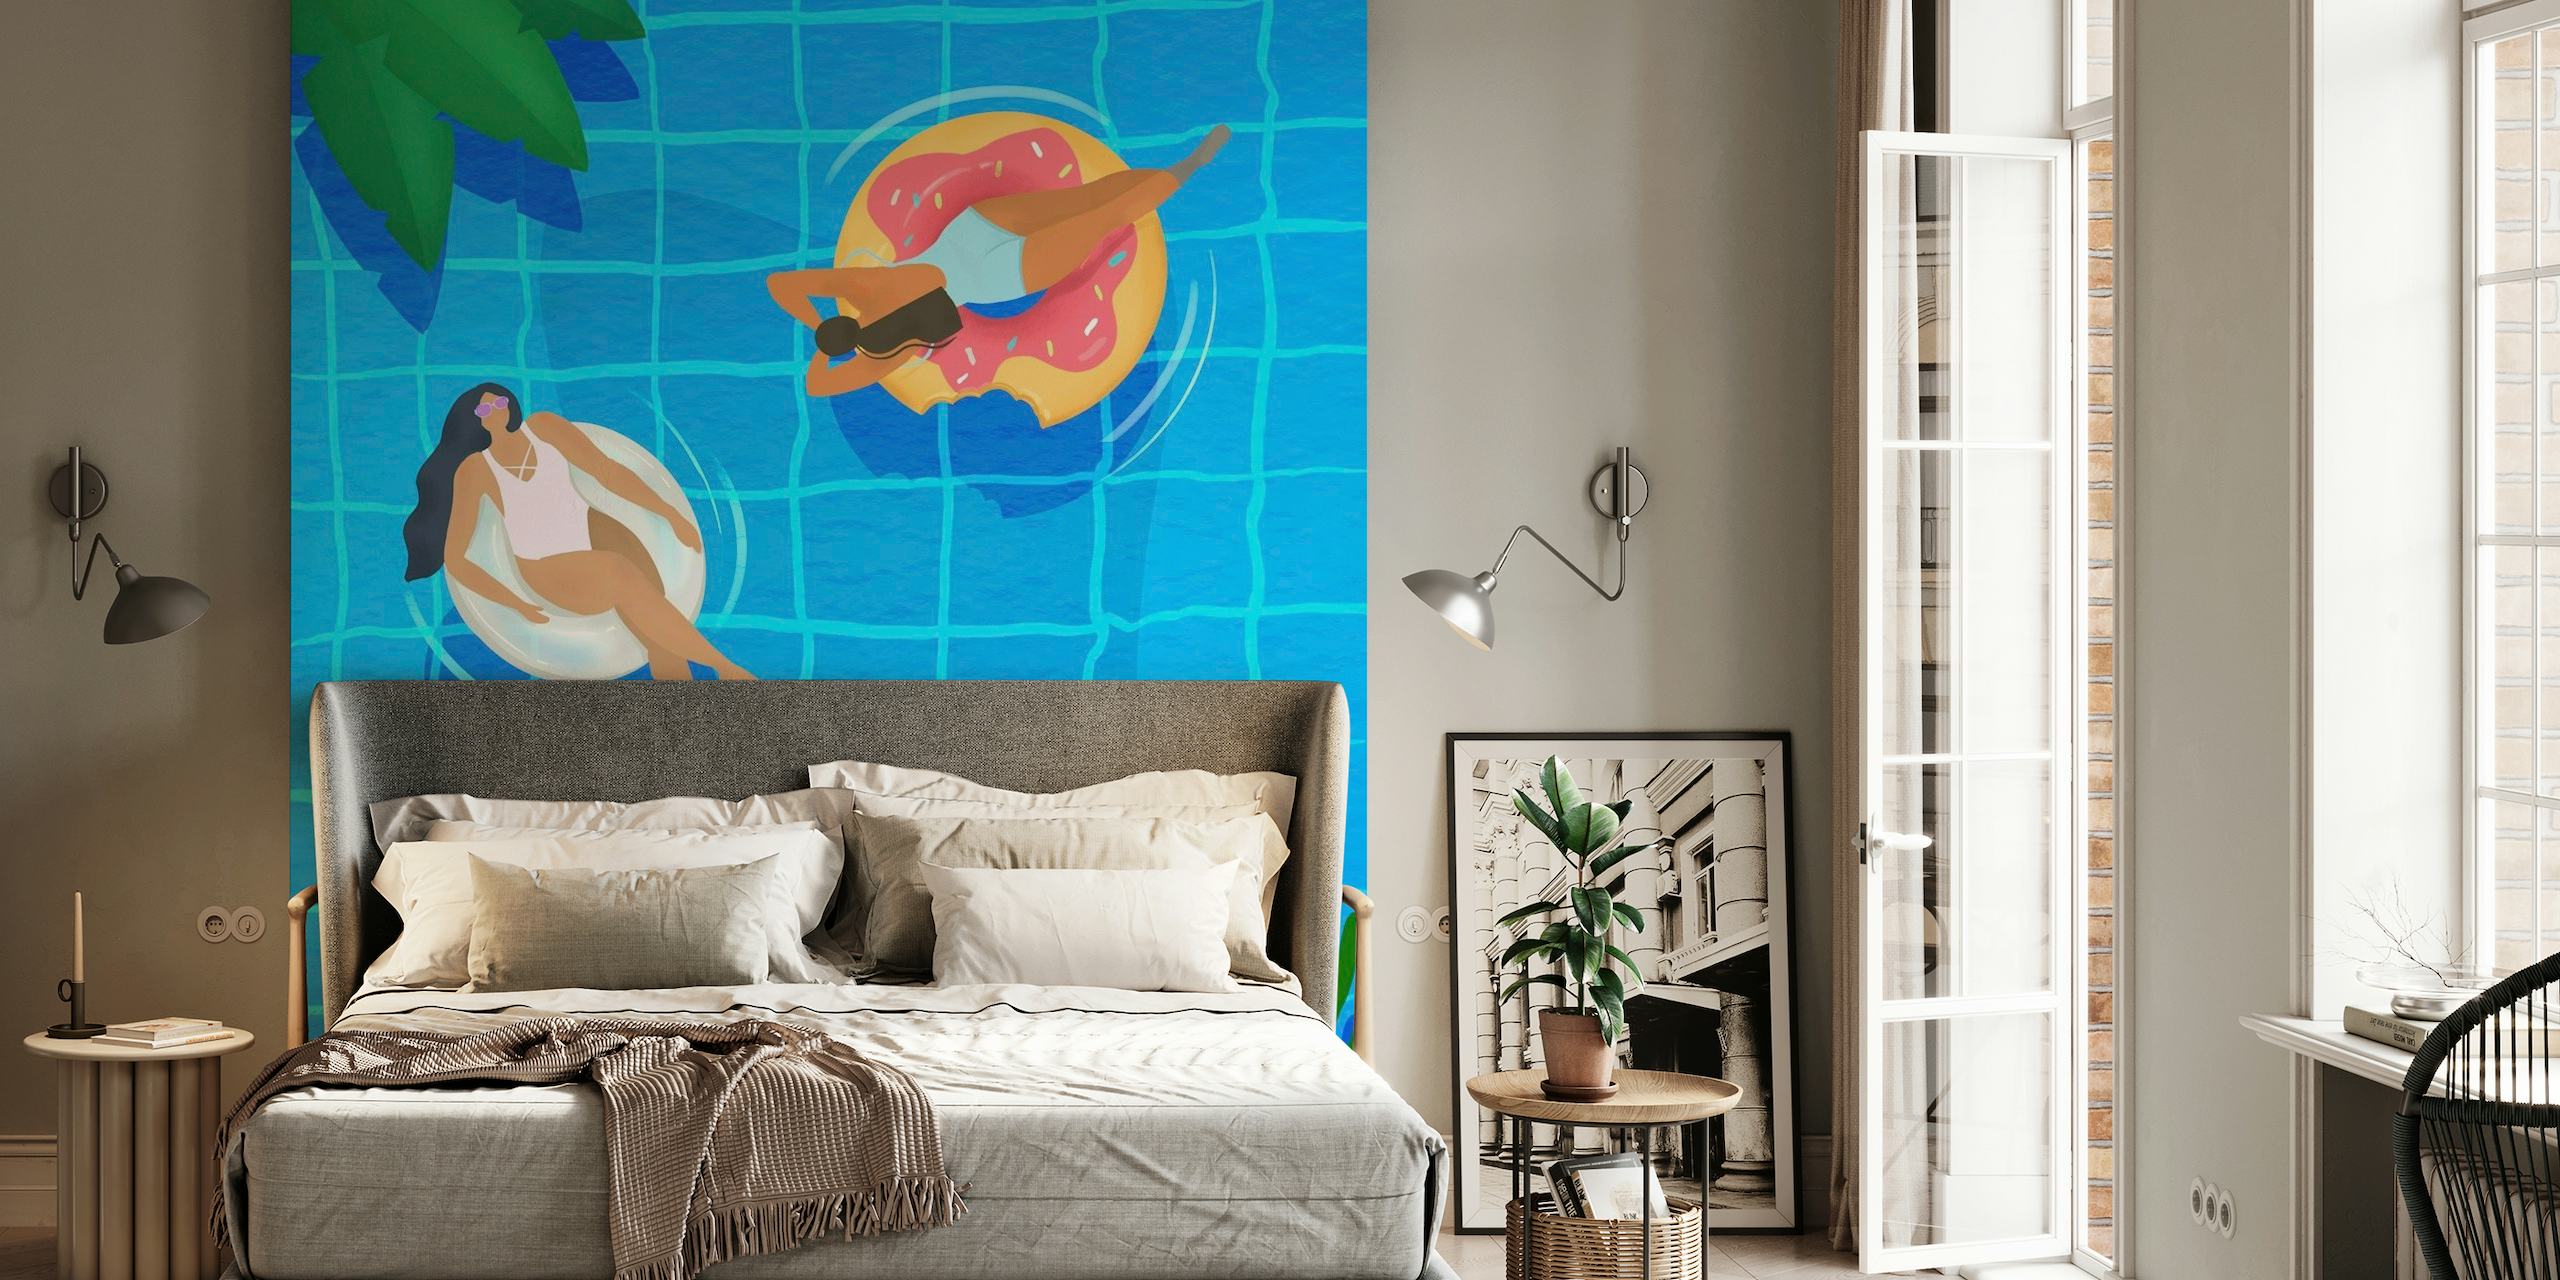 Stylish women lounging on pool inflatables in a clear blue pool with tropical elements, in a wall mural